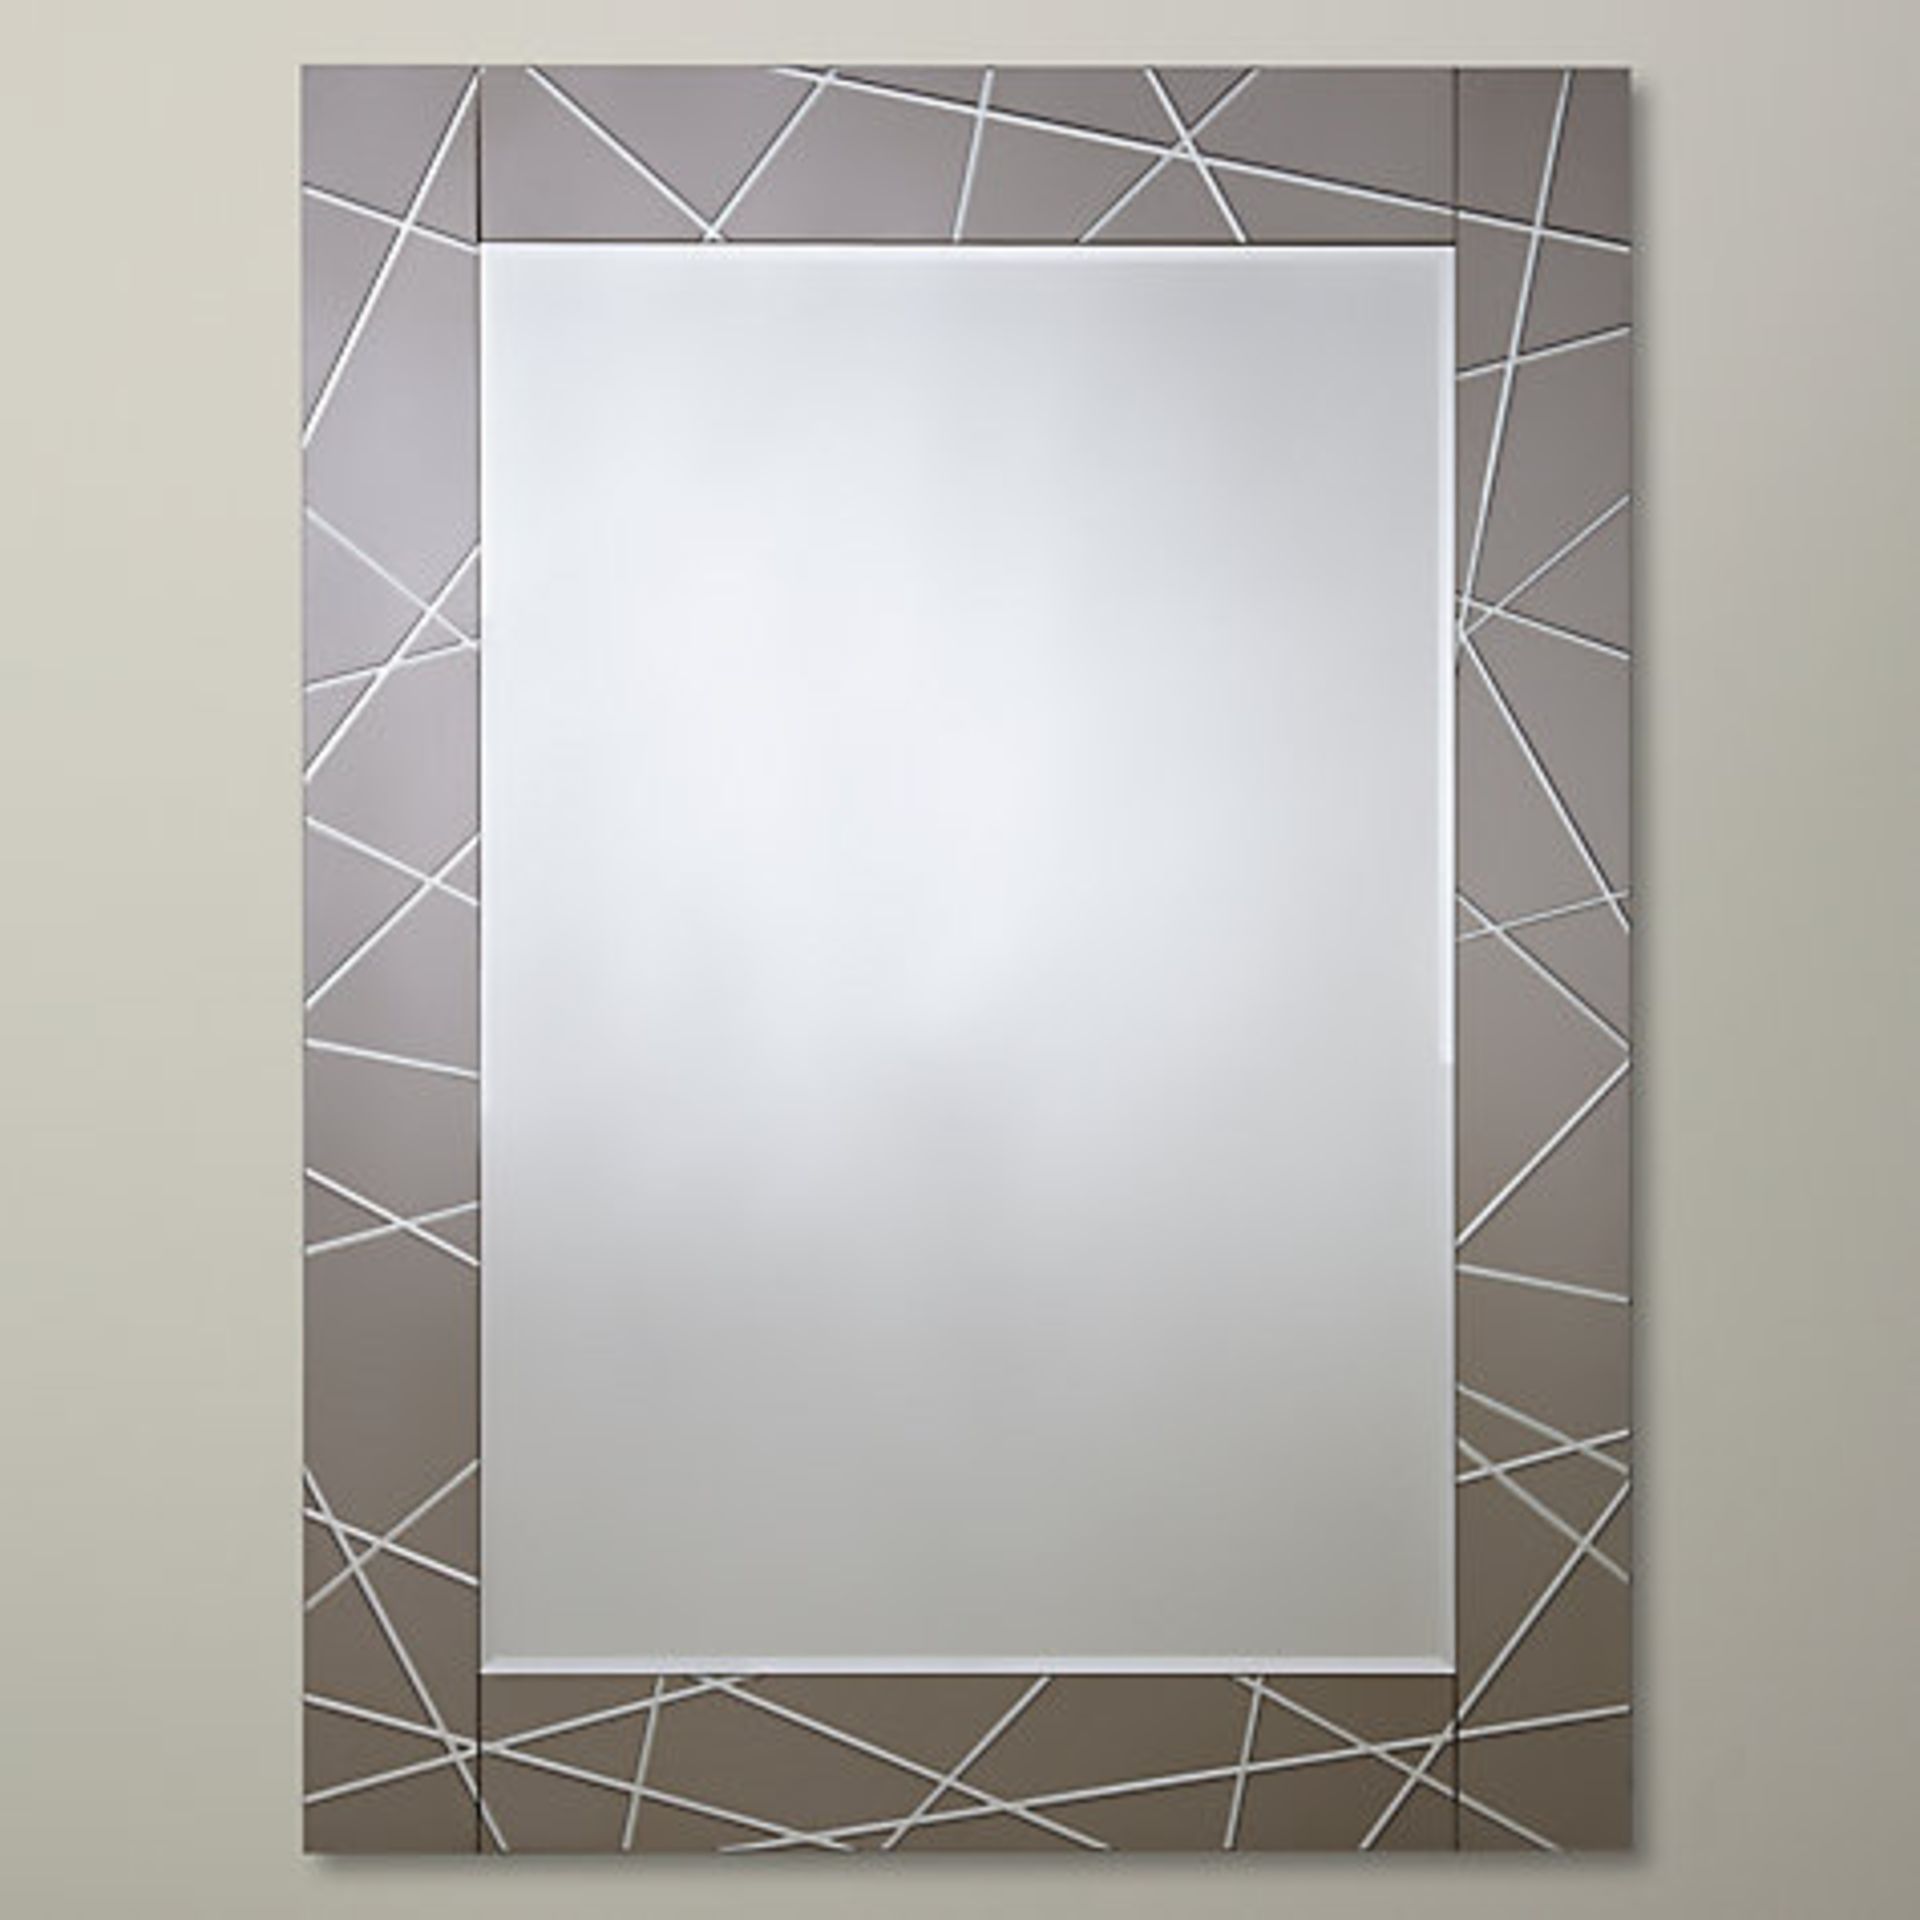 1 x BOXED SMOKE ENGRAVED MIRROR IN SILVER RRP £175 (22.5.17)(4004) *PLEASE NOTE THAT THE BID PRICE